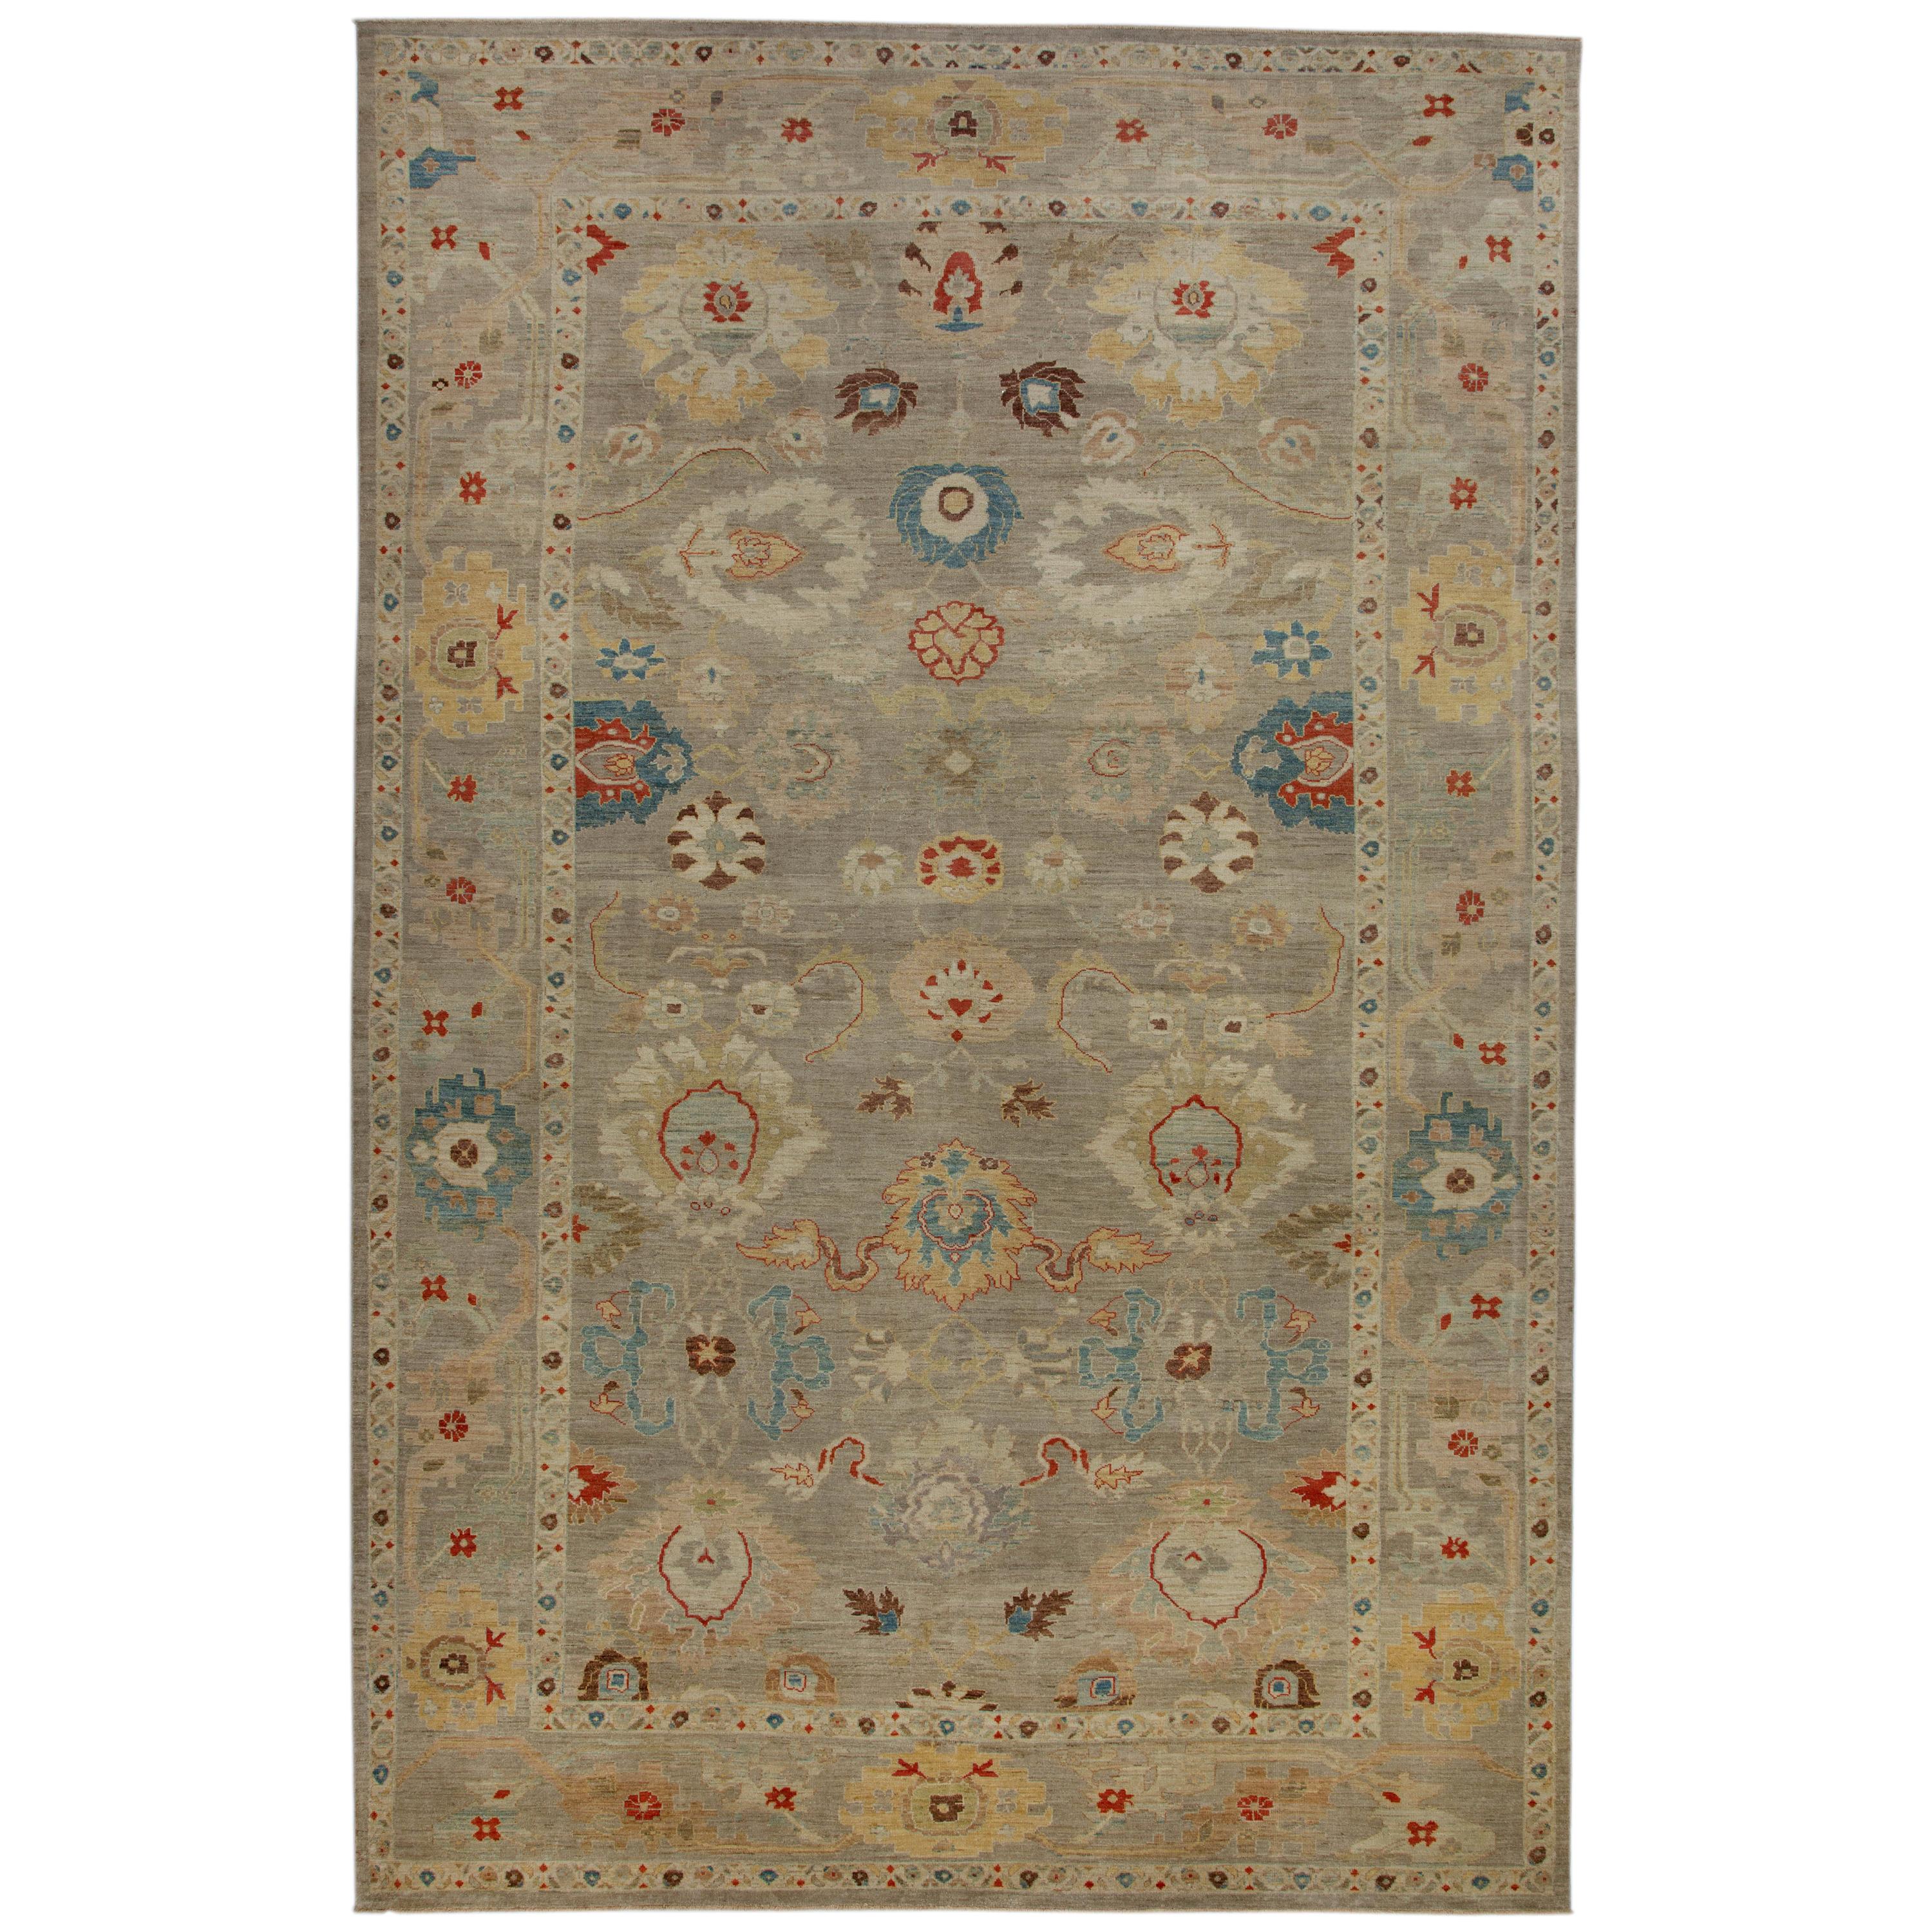 Contemporary Turkish Sultanabad Rug with Colorful Dragon and Blossom Details